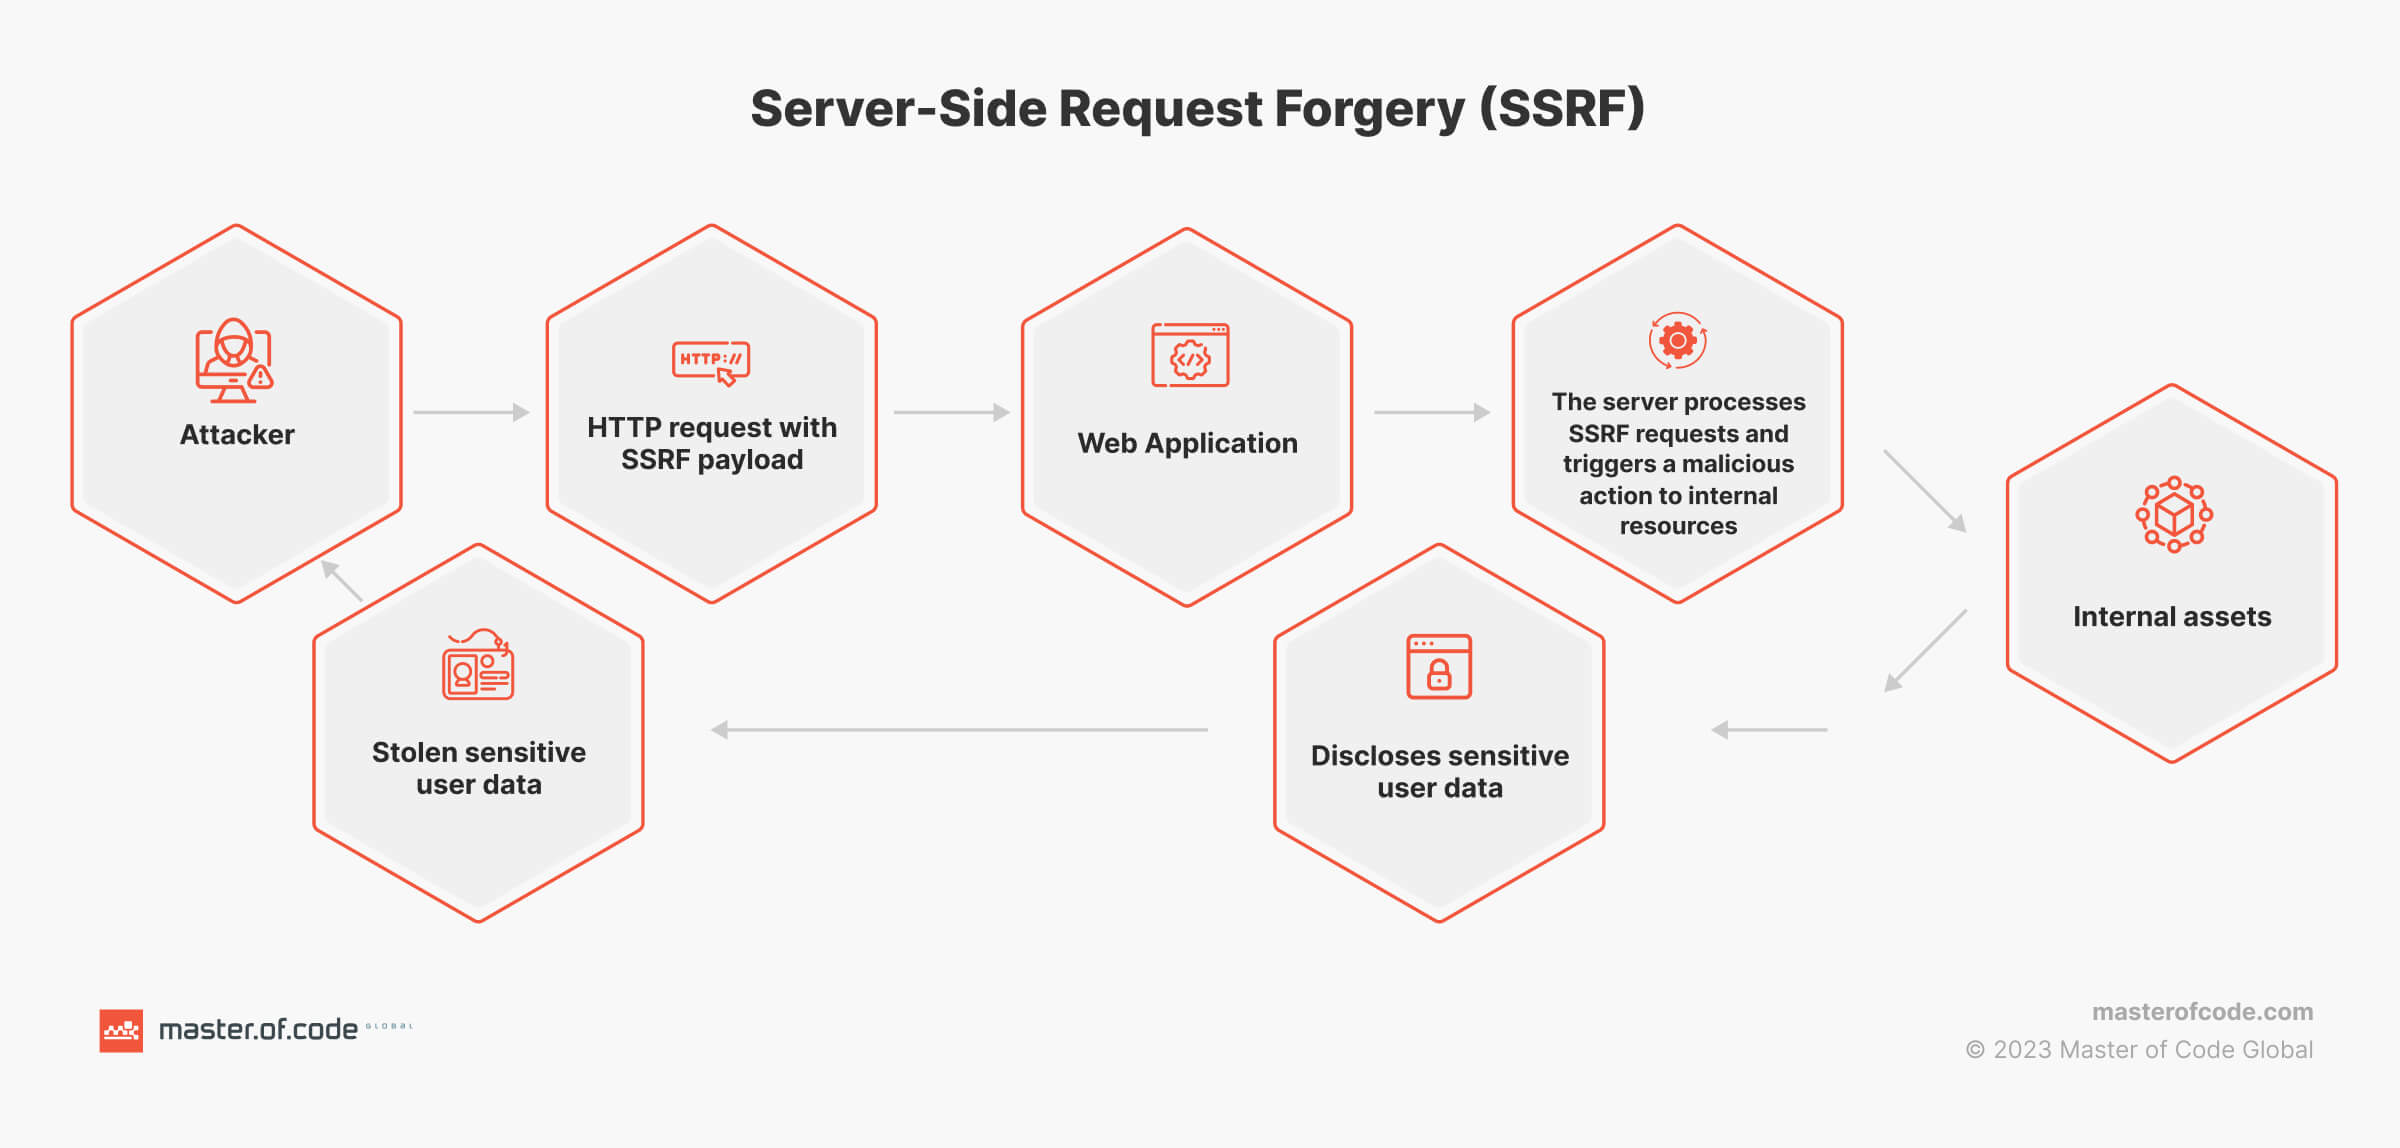 Server-Side Request Forgery